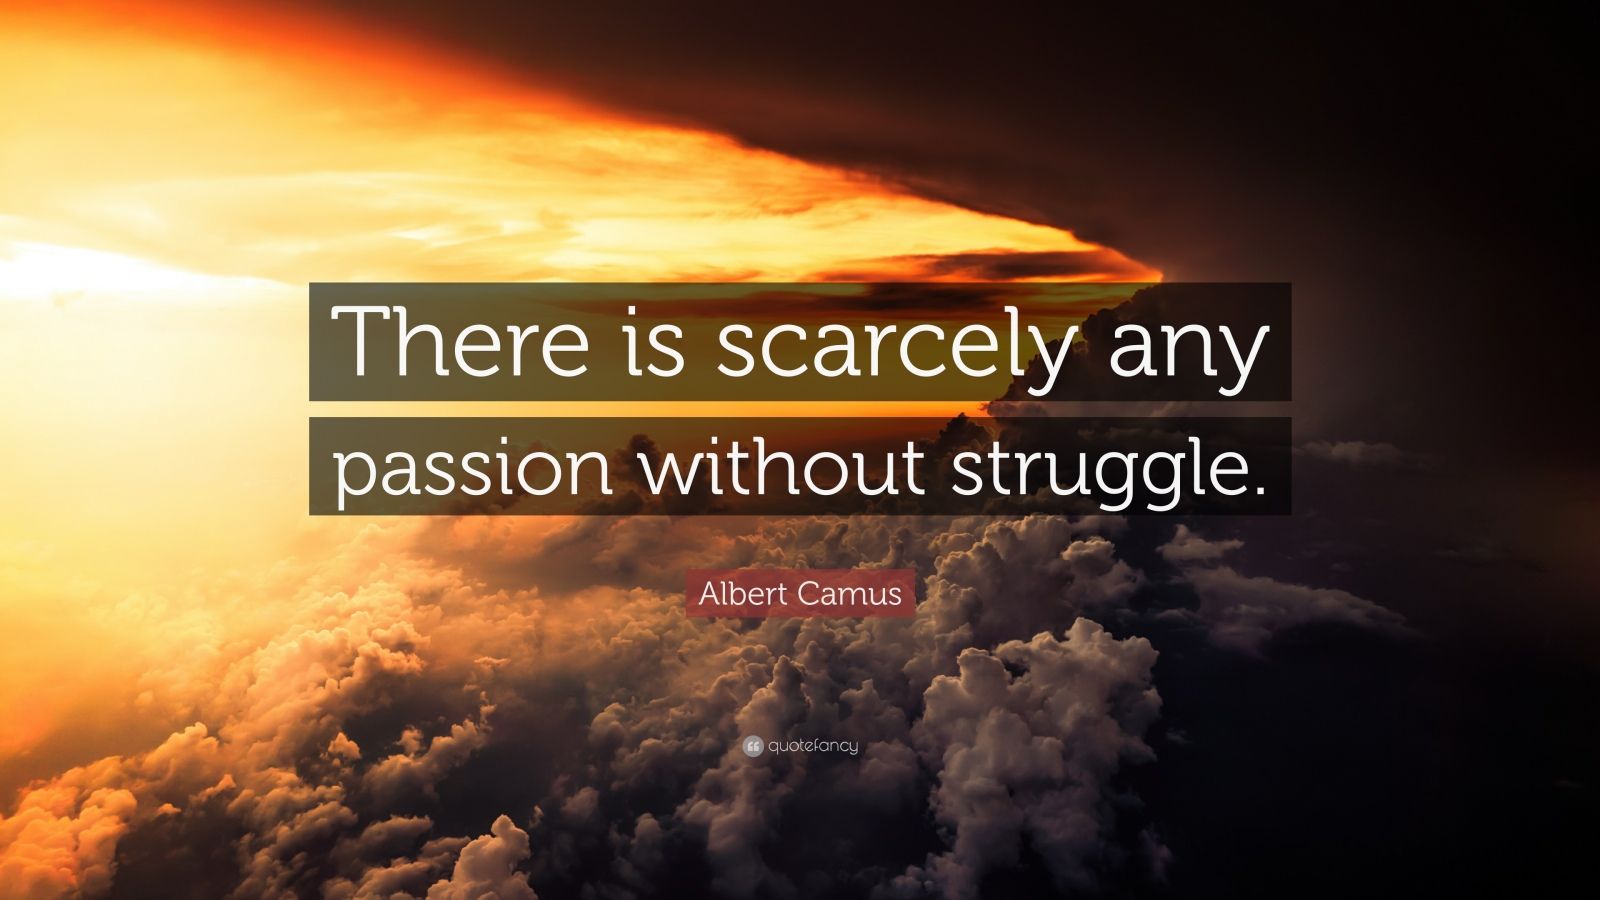 Albert Camus Quote: “There is scarcely any passion without struggle